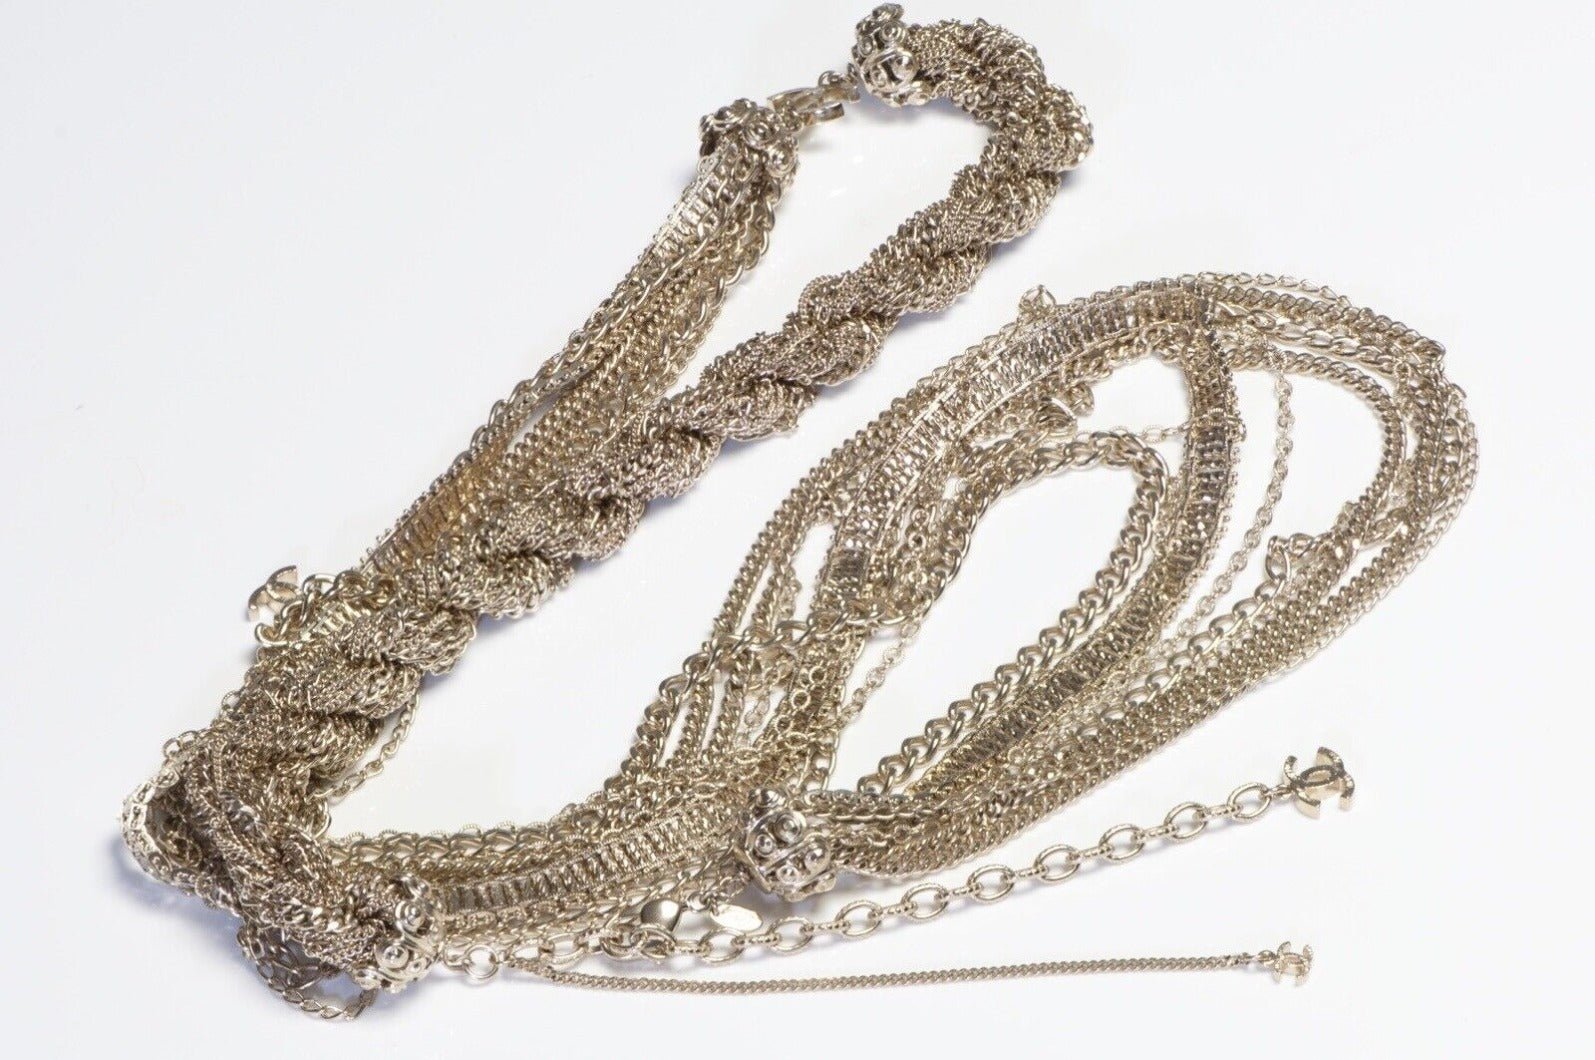 CHANEL Paris Spring 2009 Champagne Gold Multi Strand CC Rope Chain Necklace - DSF Antique Jewelry